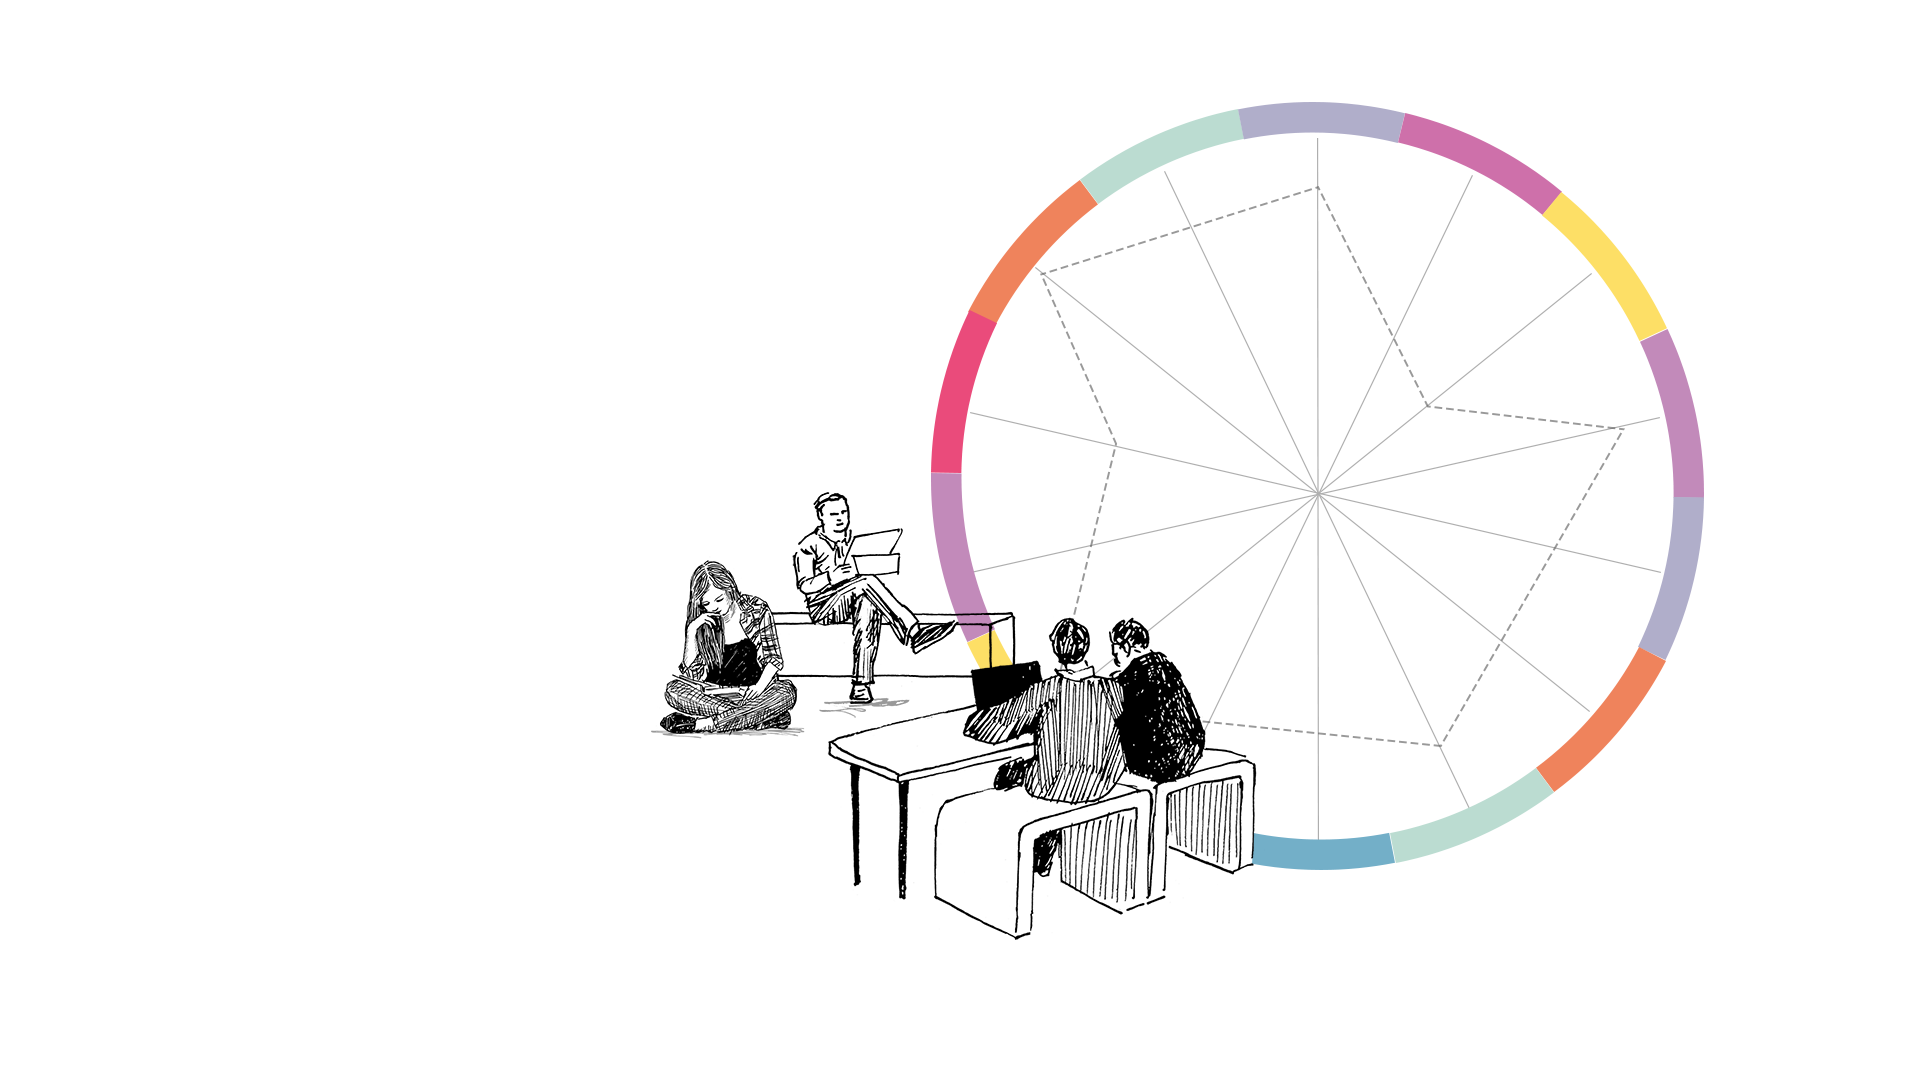 An illustration of the Place Standard wheel in the background. A group of people reading books and looking at their laptops.